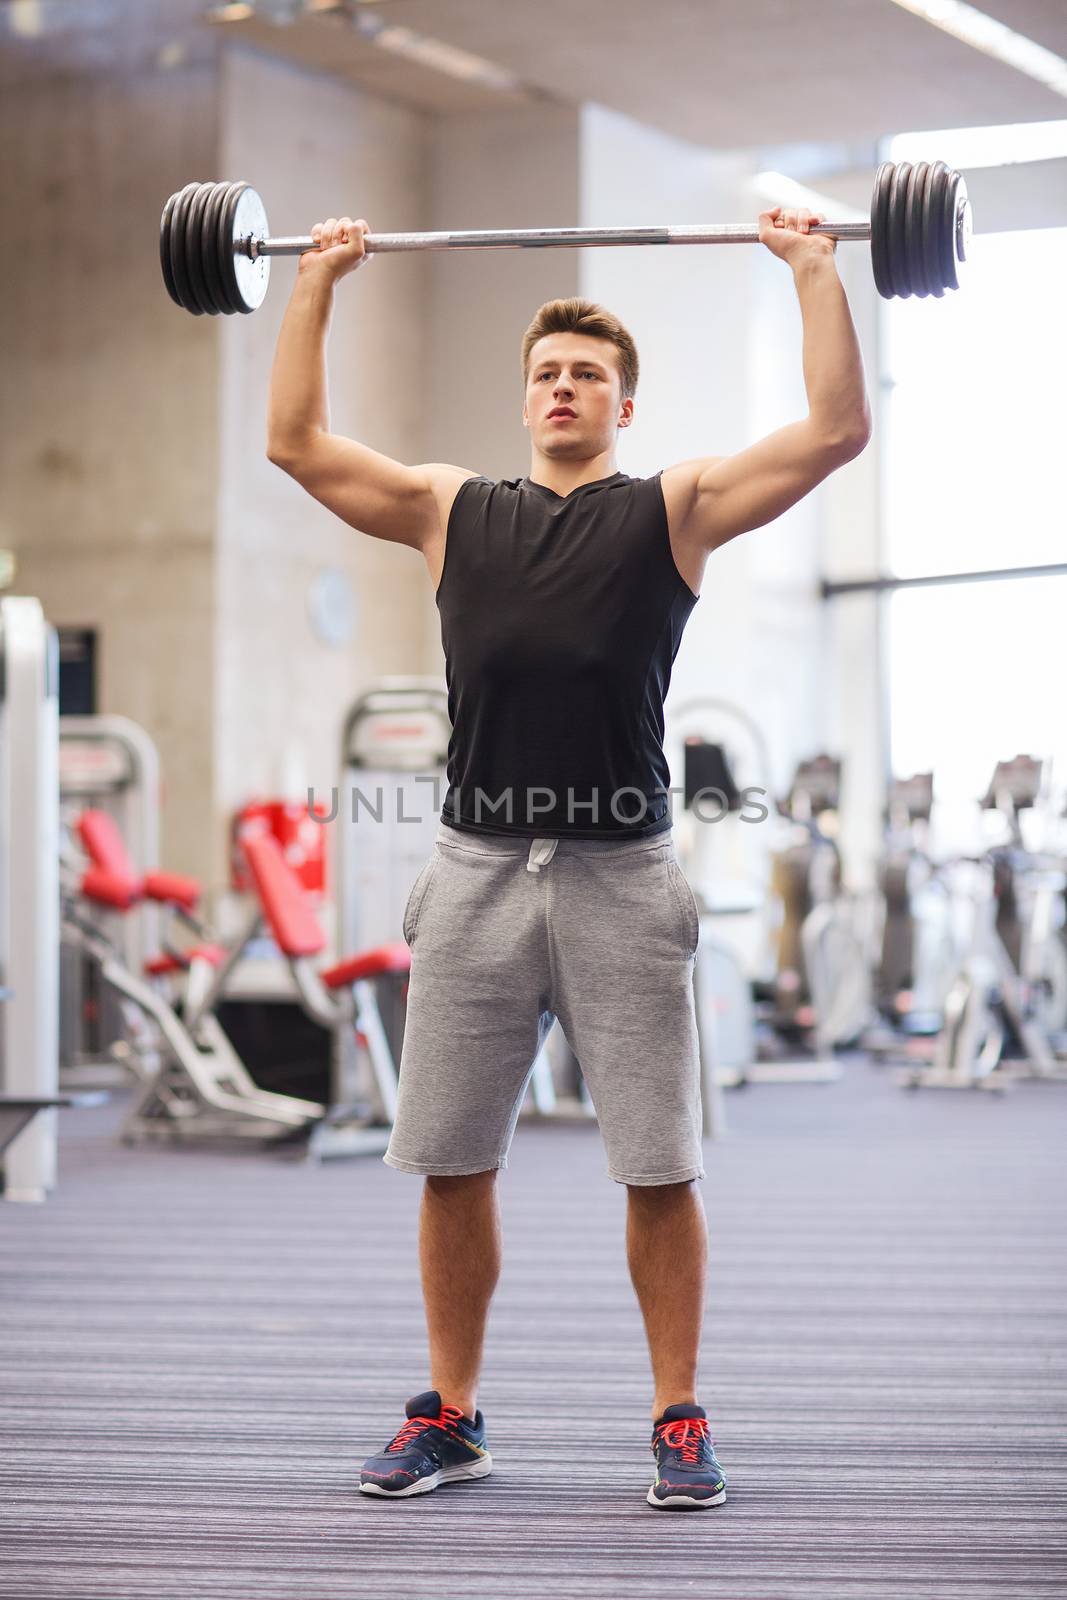 sport, bodybuilding, lifestyle and people concept - young man with barbell flexing muscles in gym